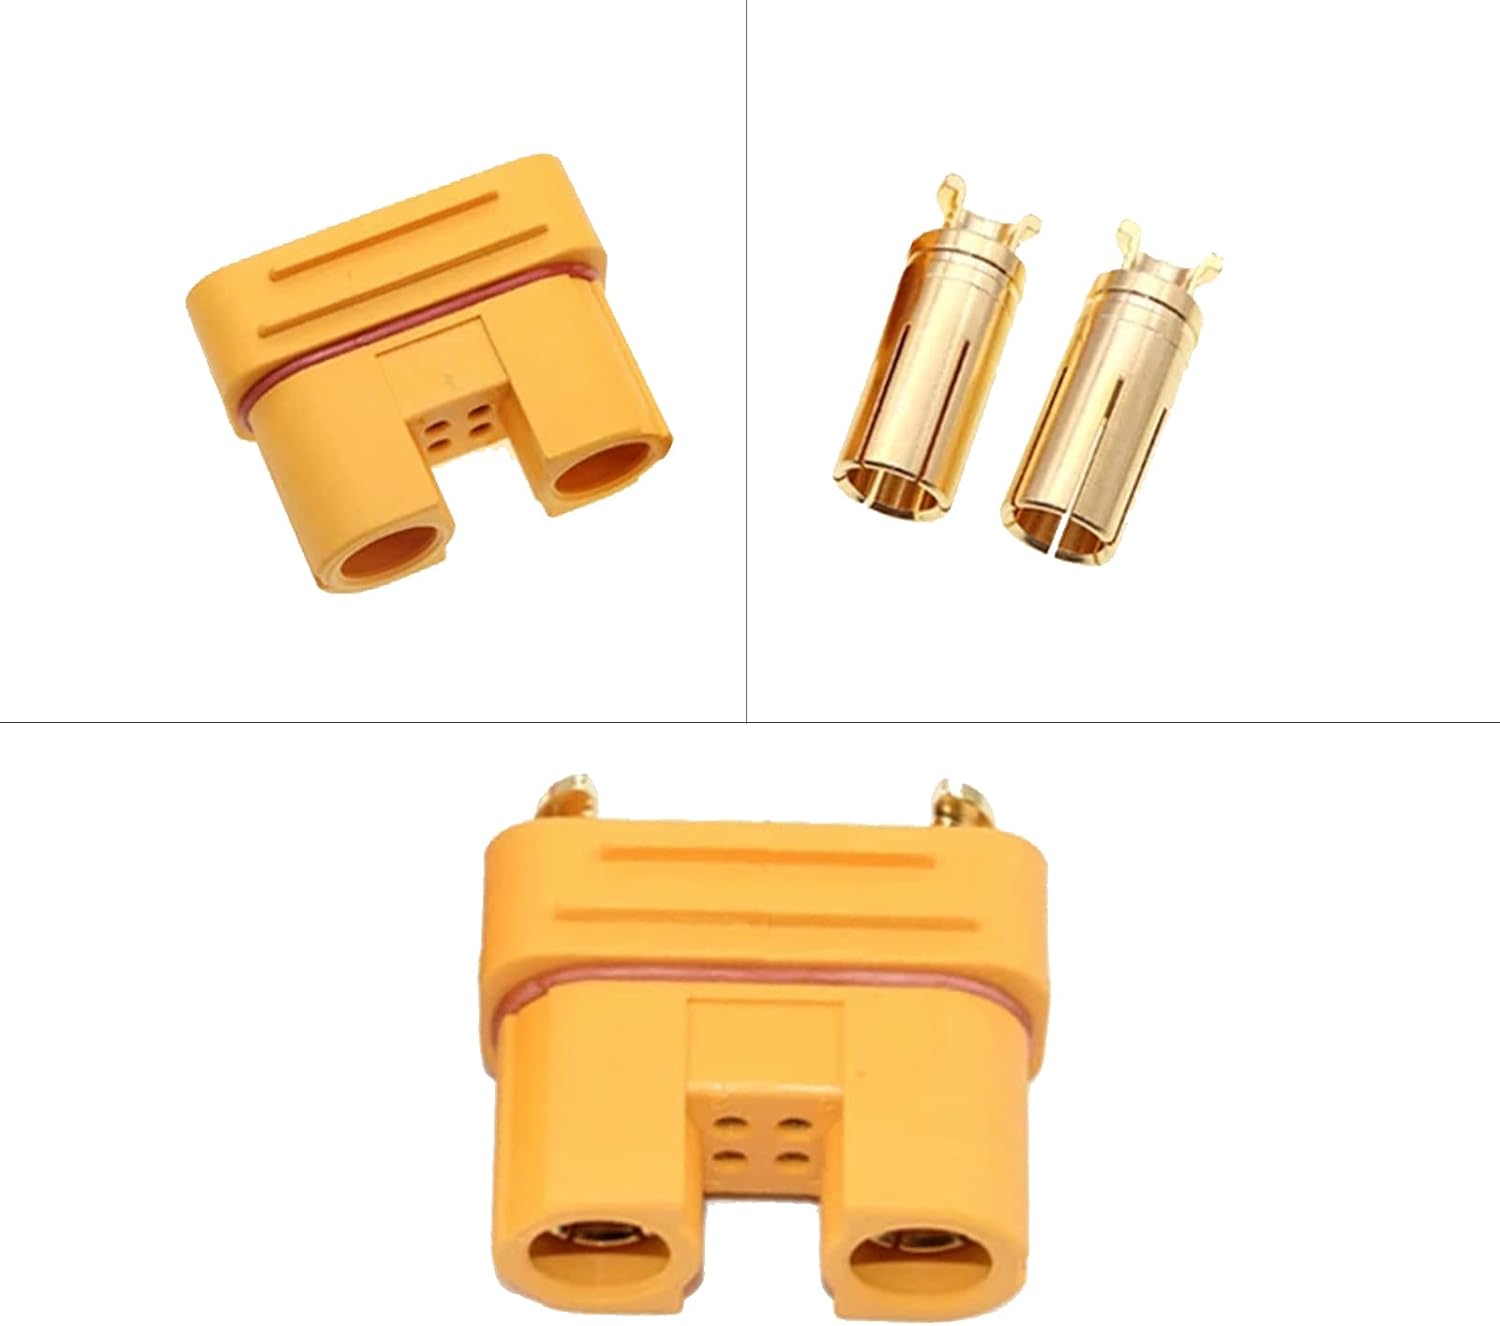 Amass AS150U Connector Male/Female with Signal Pins - Anti-Spark (1 pair)